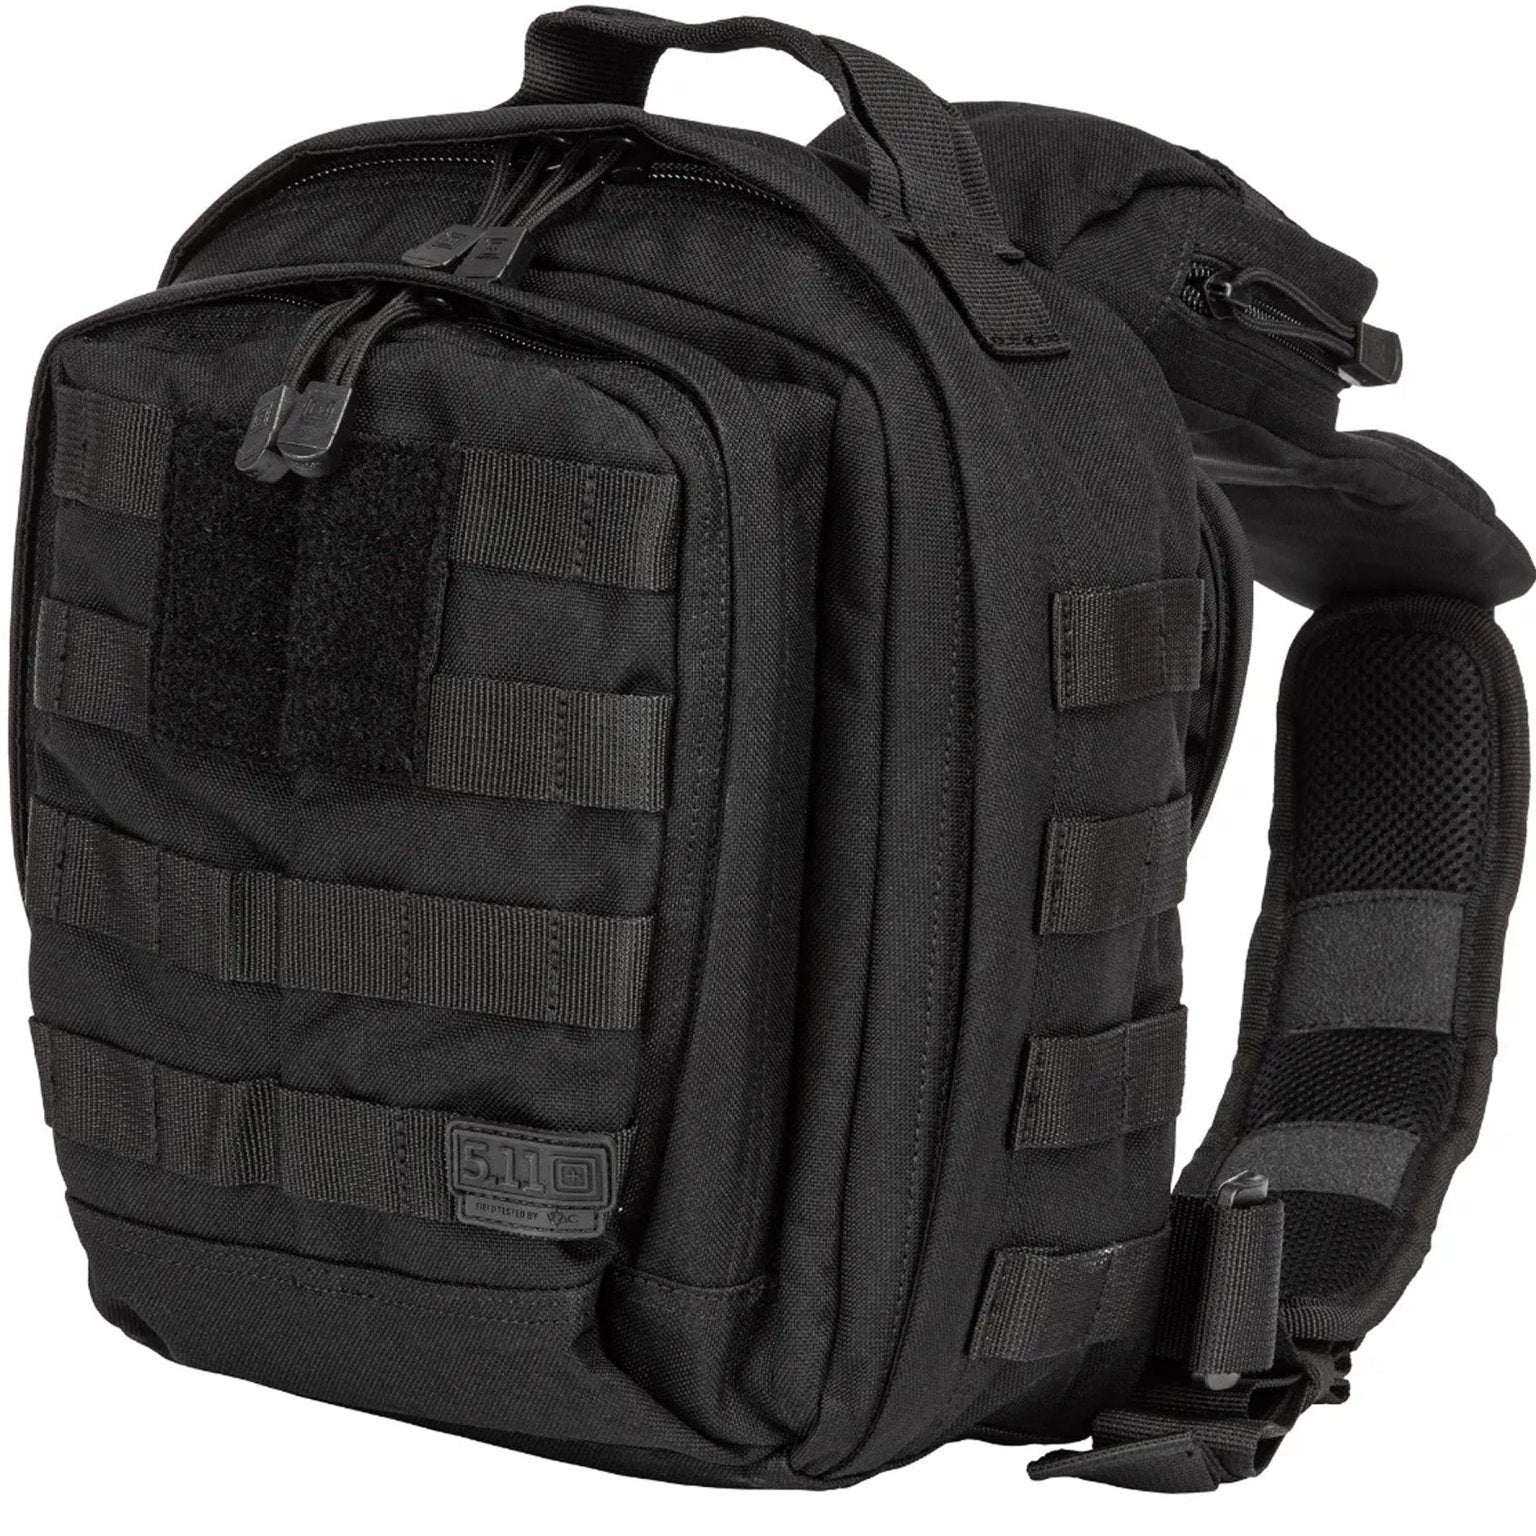 4elementsclothing5.11 Tactical5.11 Tactical - 5.11 Tactical MOAB™ 6 SLING PACK 11L - Style 56963Bag56963-019